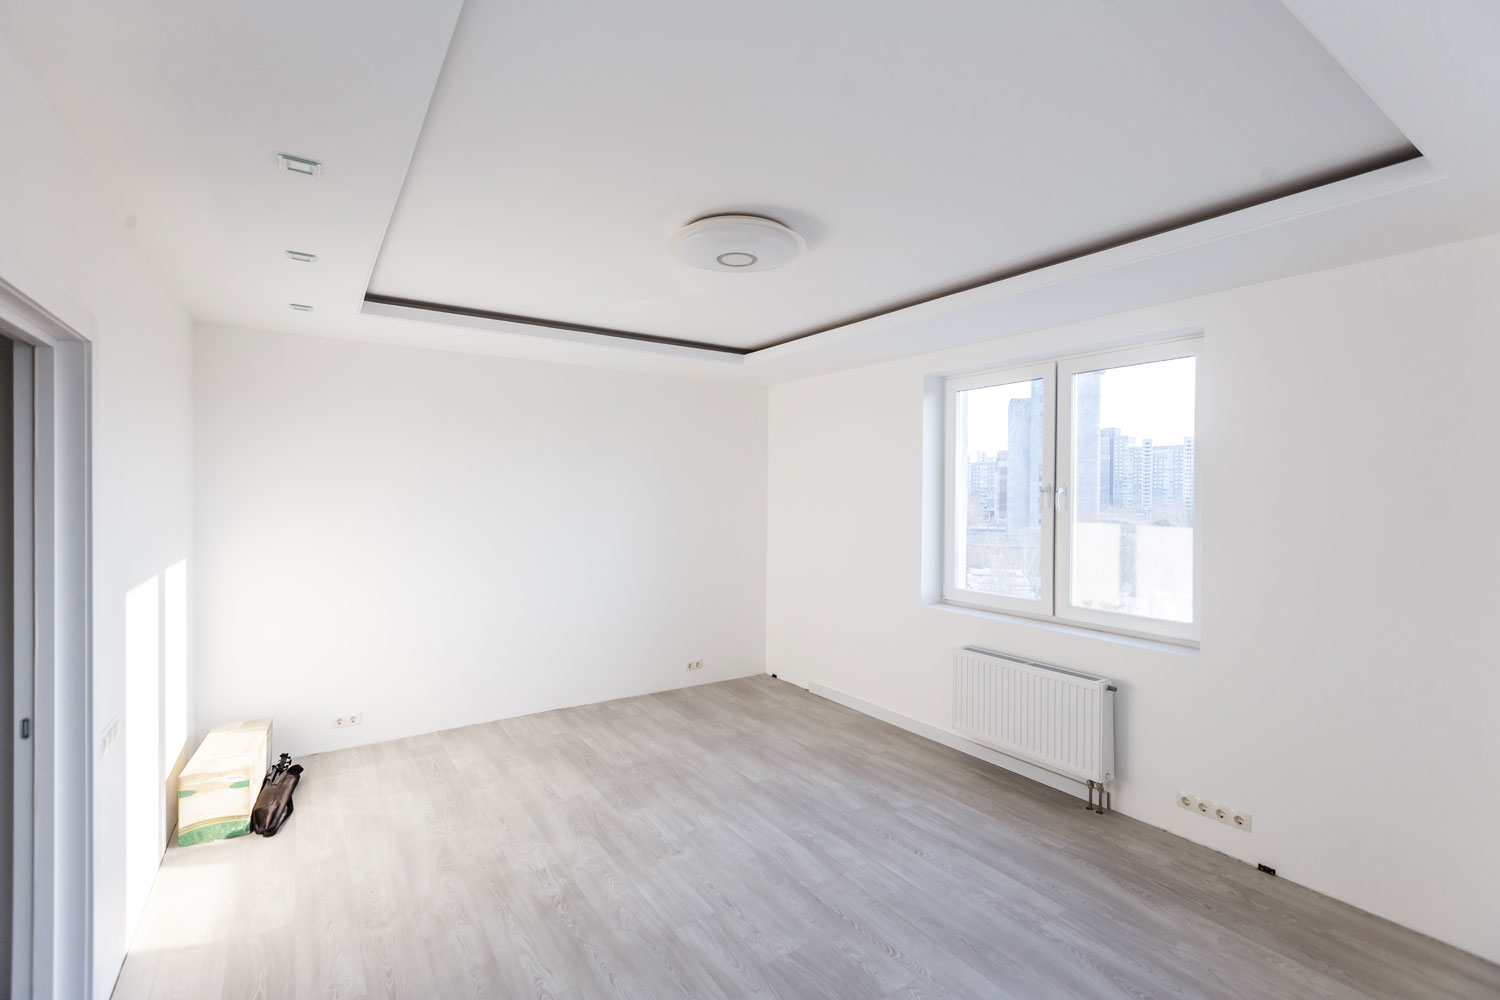 White living room interior with white walls and light laminated flooring